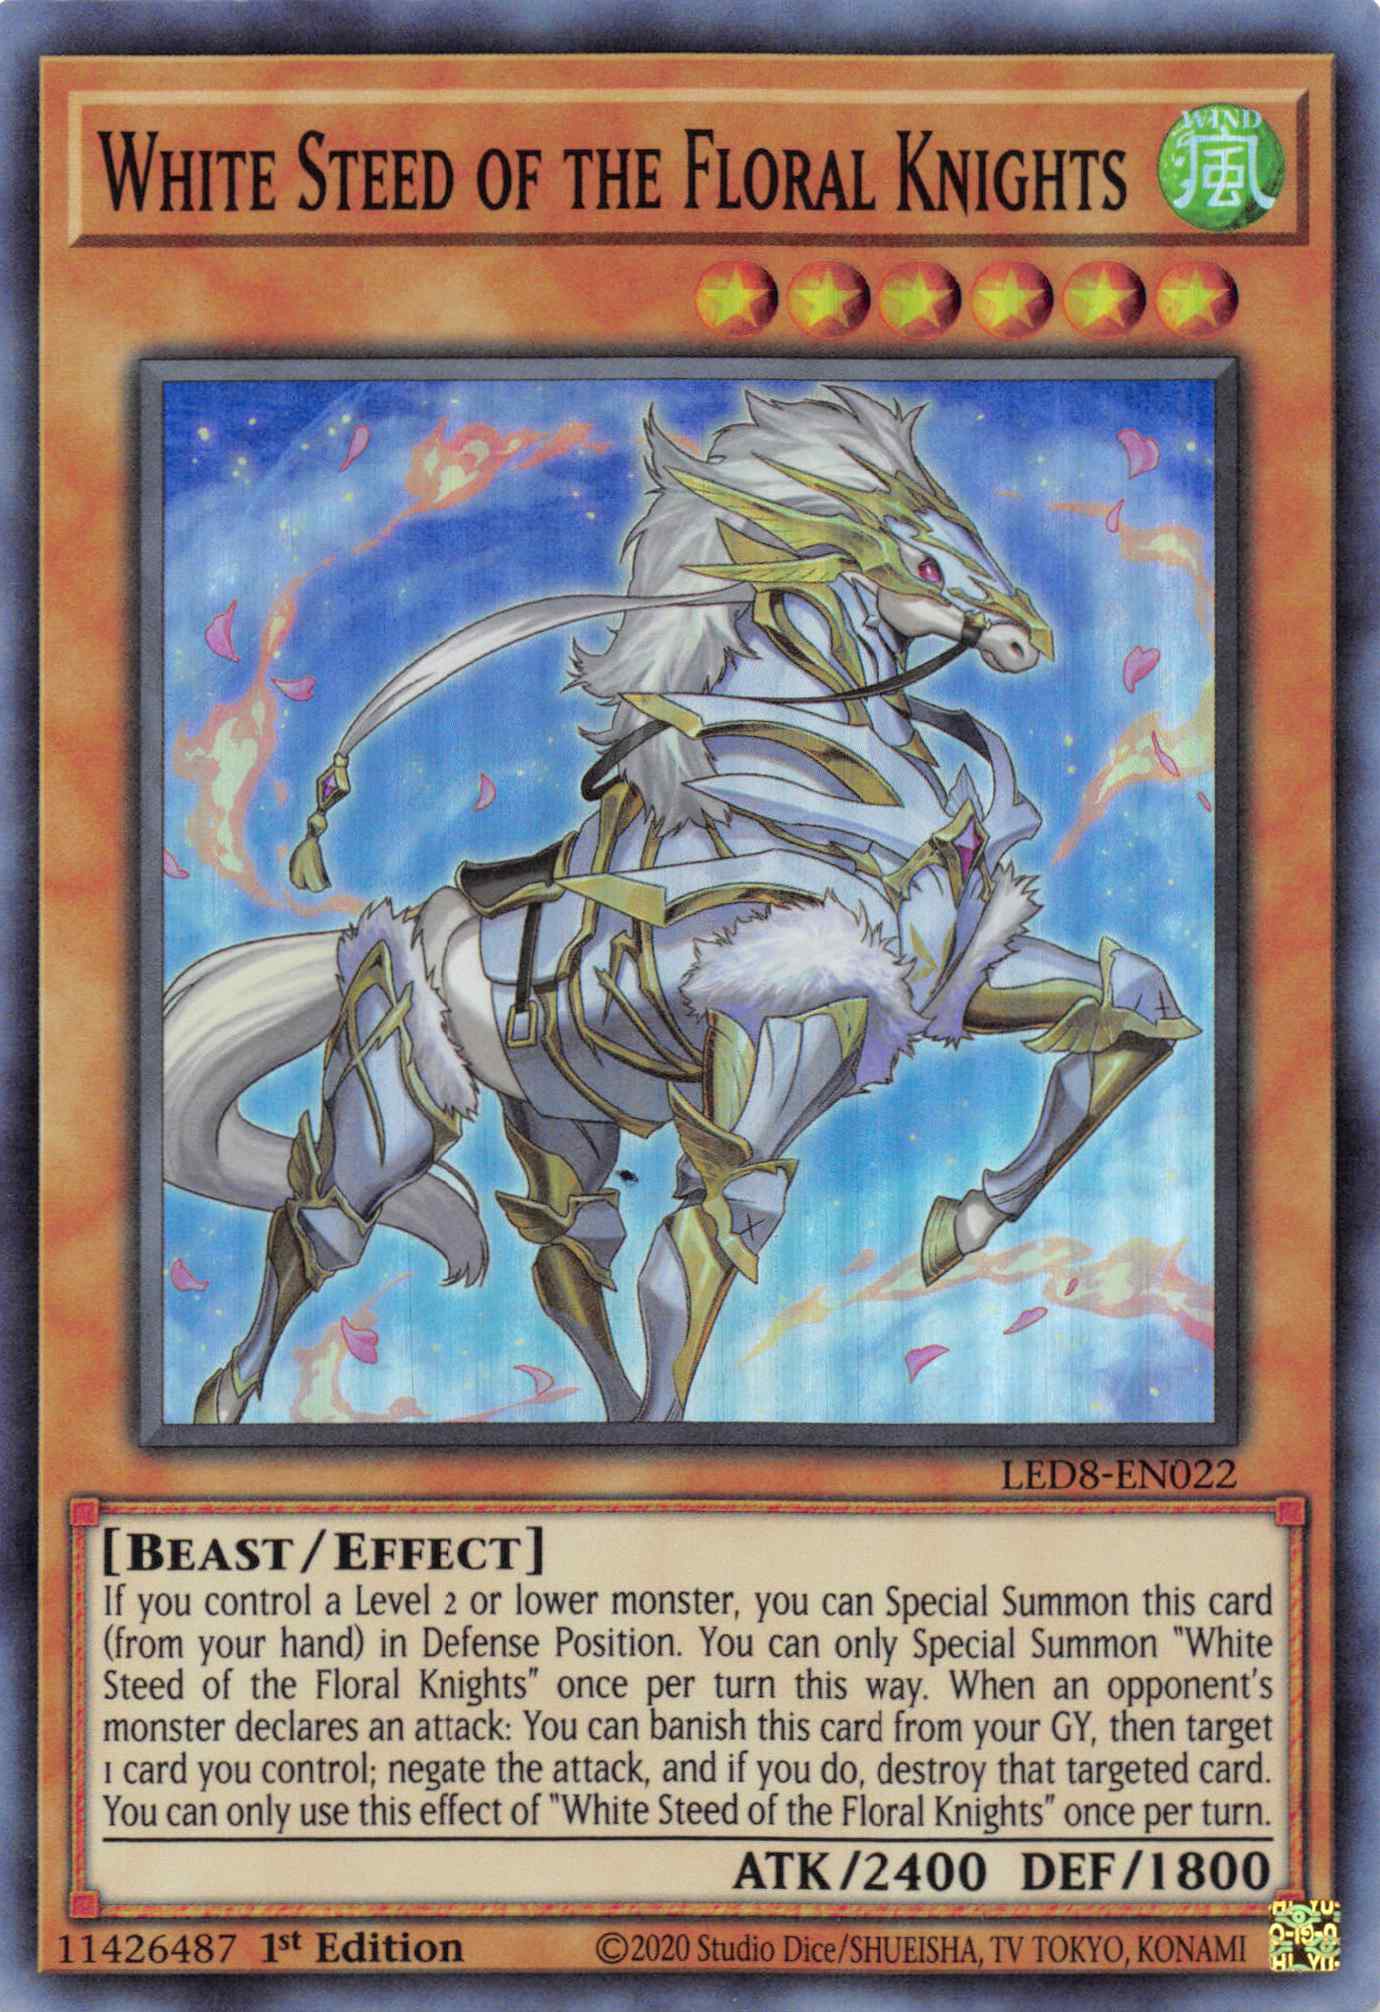 White Steed of the Floral Knights [LED8-EN022] Super Rare | Galaxy Games LLC